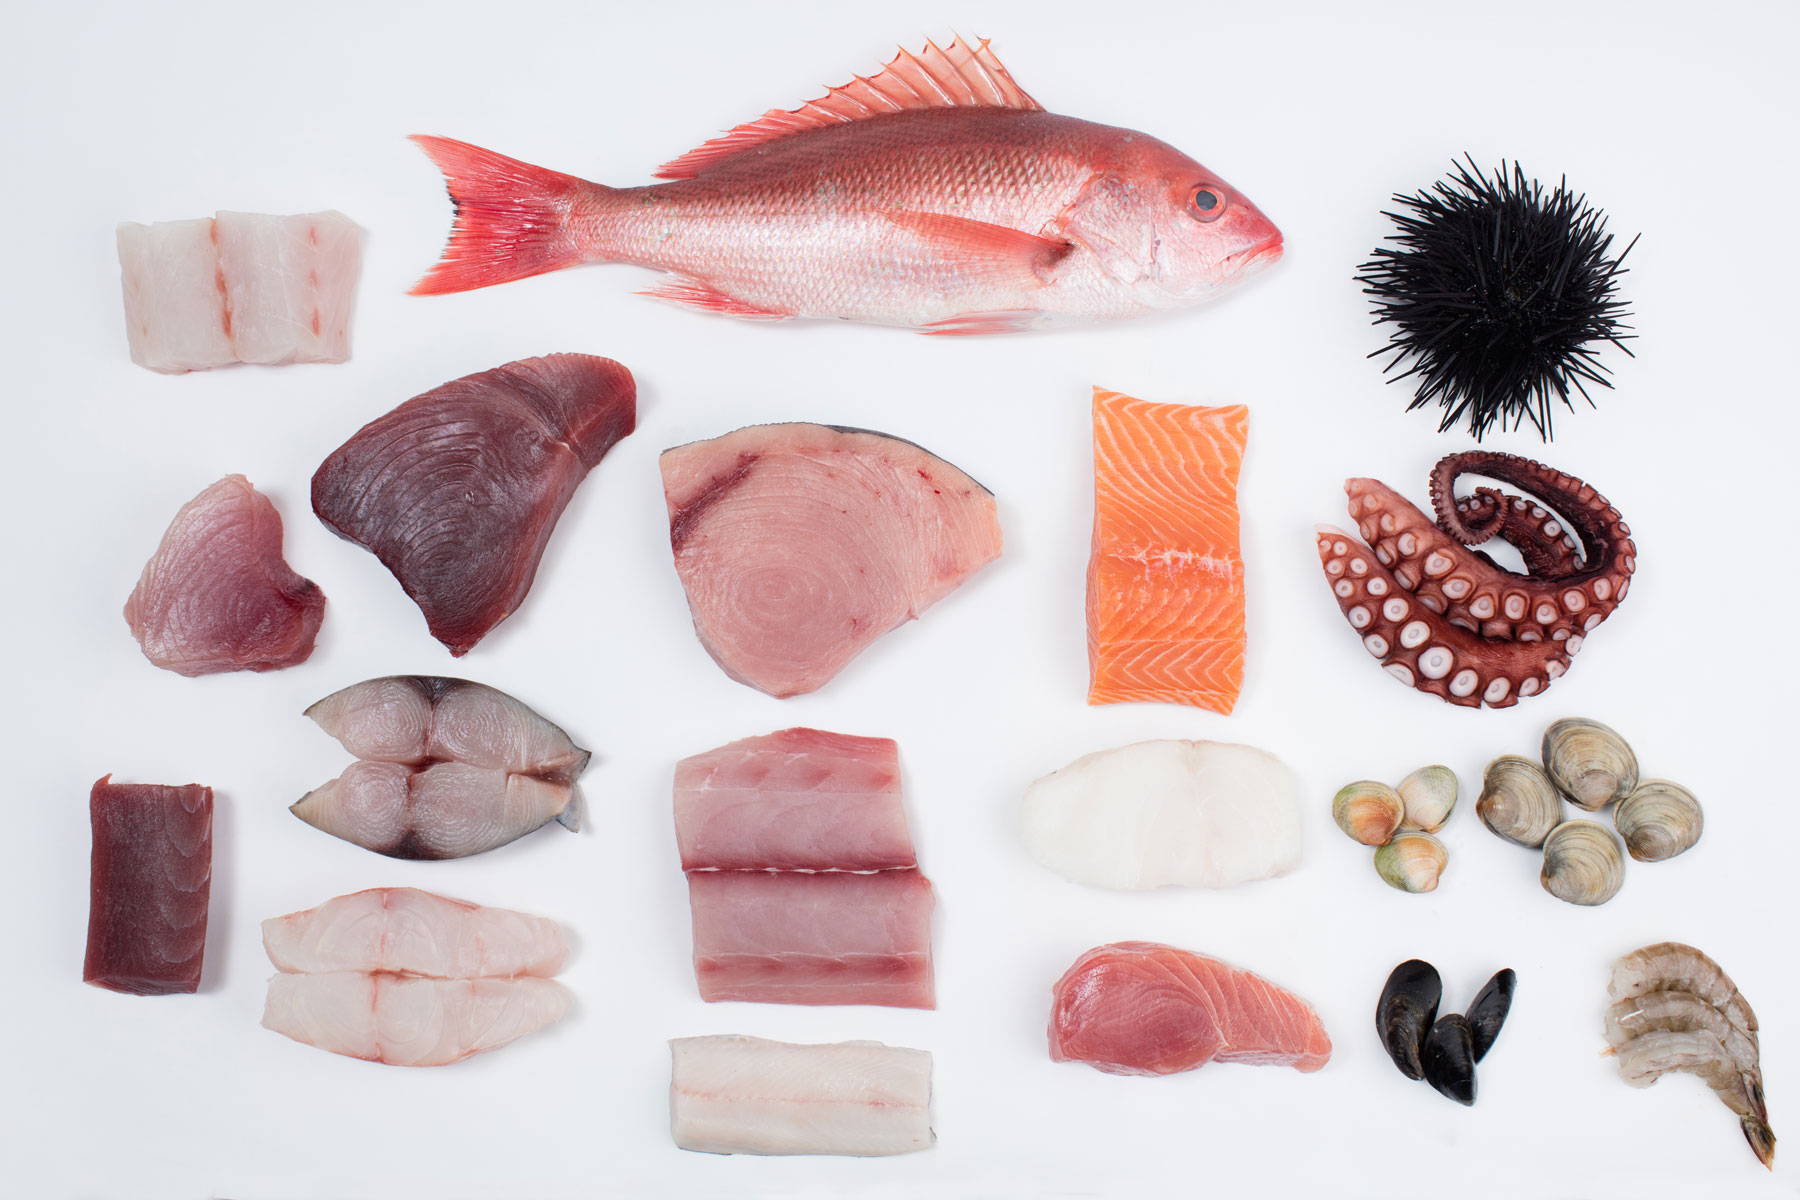 An Image of a variety of Freshly cut seafood. 